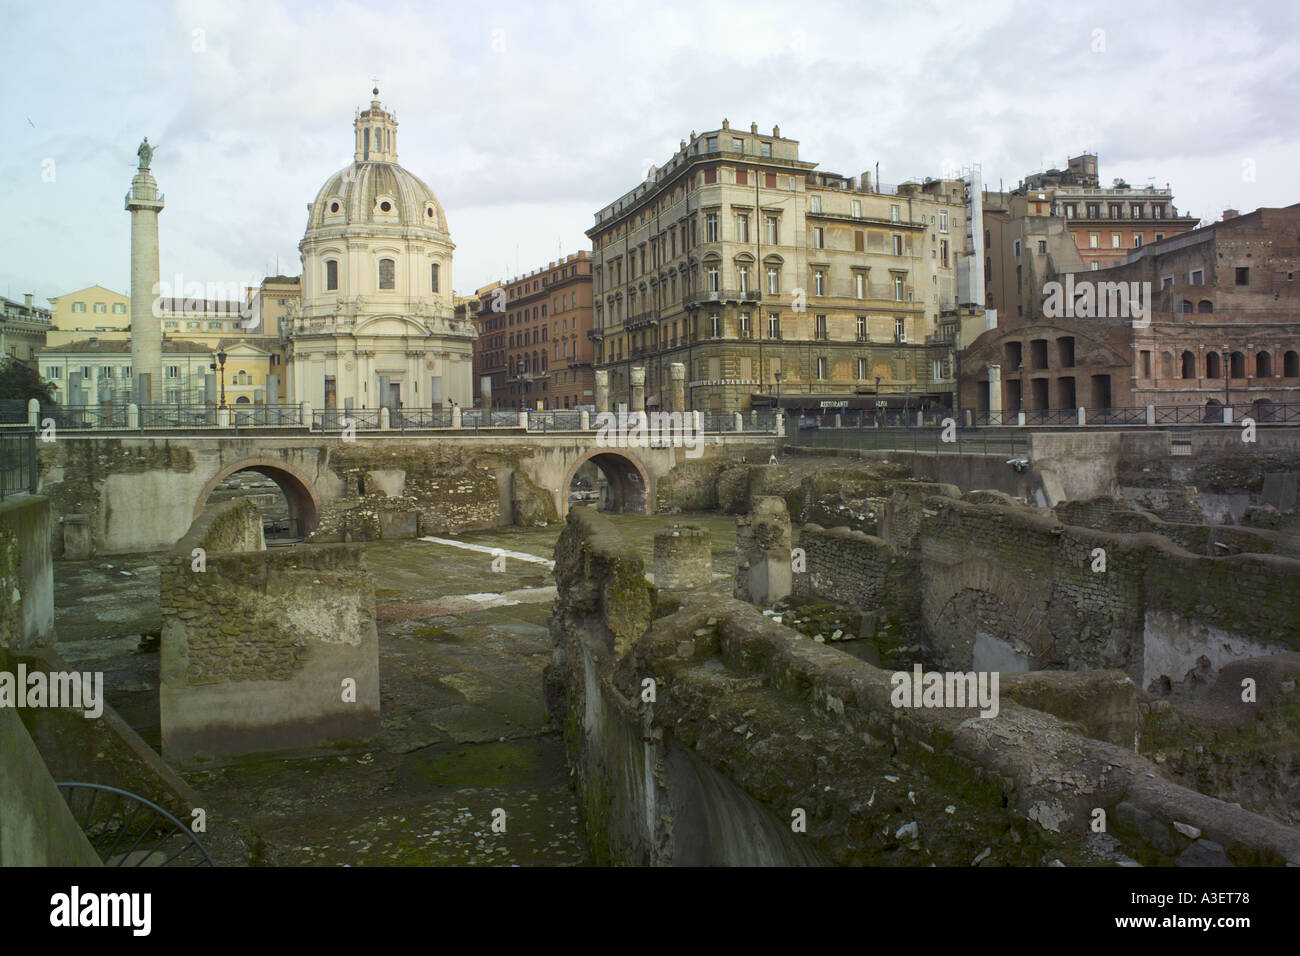 Rome Italy Europe The Eternal City The Eternal City view across ruins to the Trajan Forum Foro Traiano Stock Photo